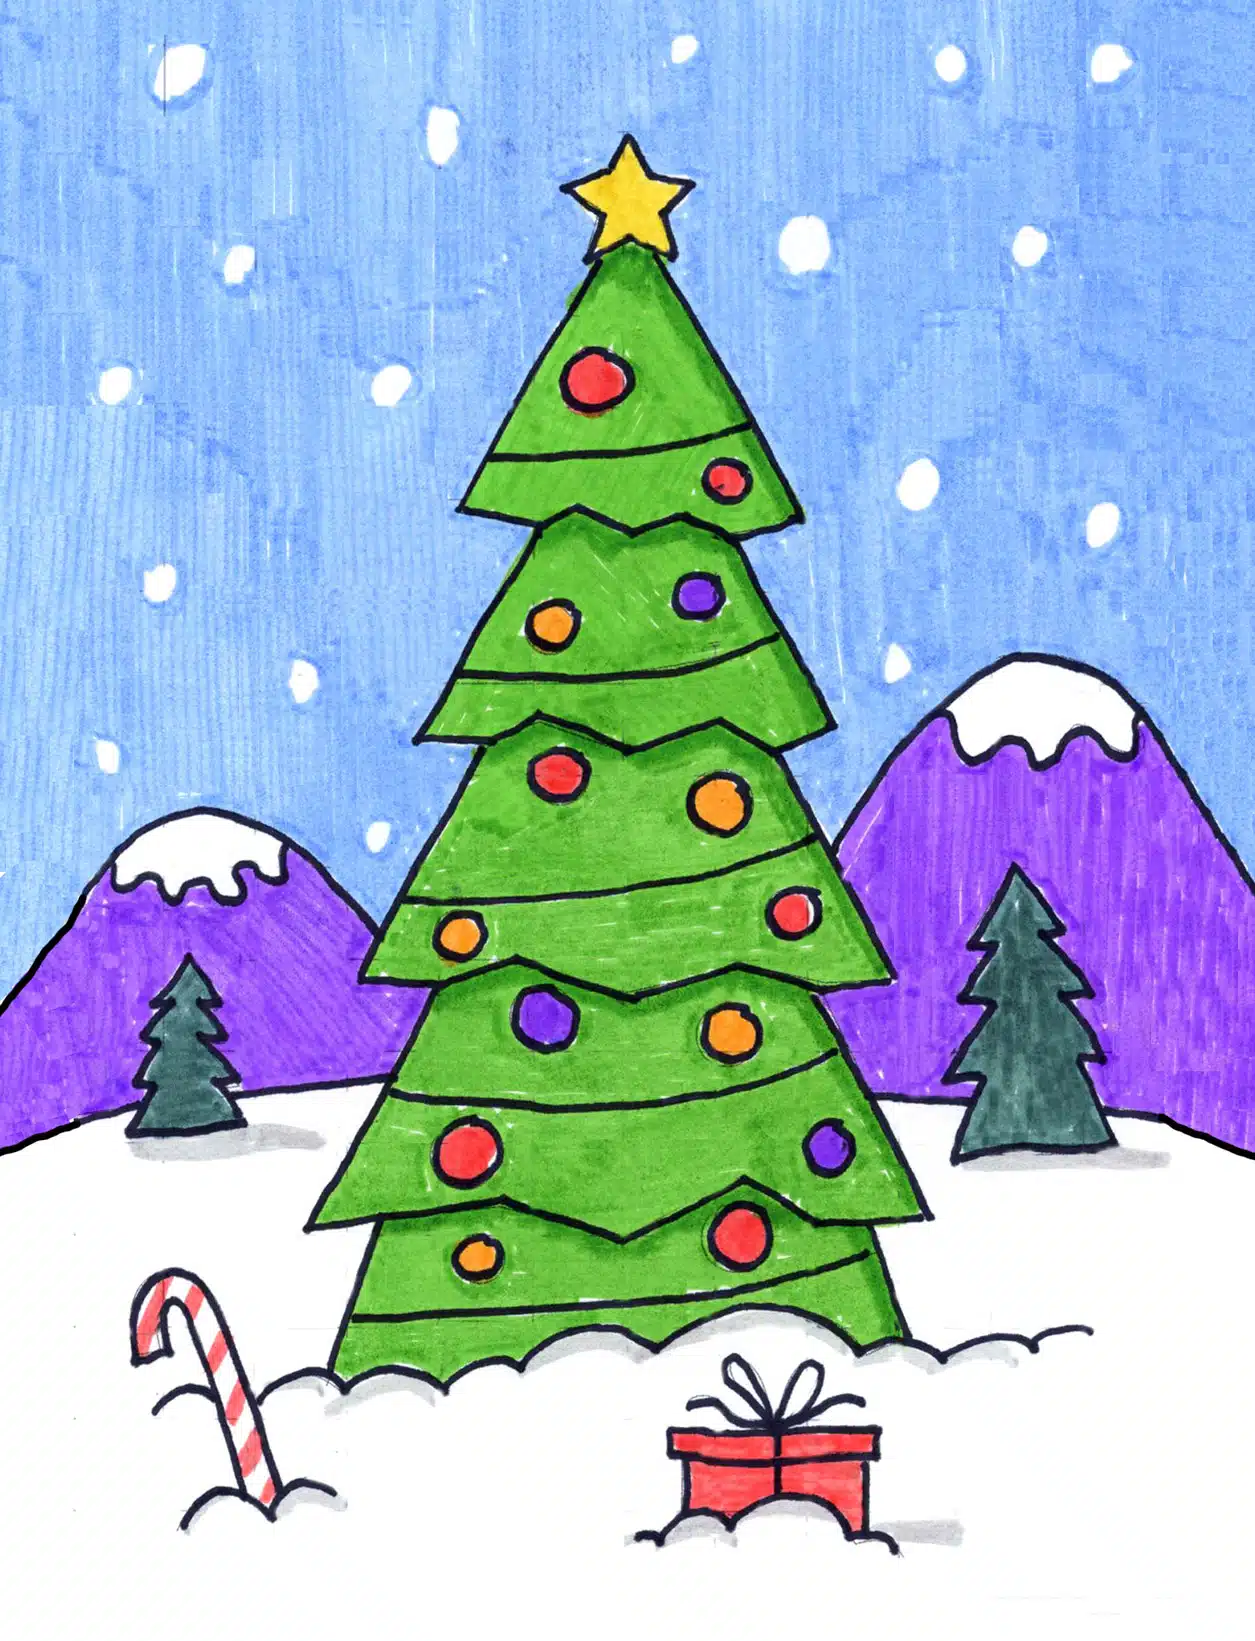 Easy How to Draw a Christmas Tree Tutorial Video and Christmas Tree Coloring Page